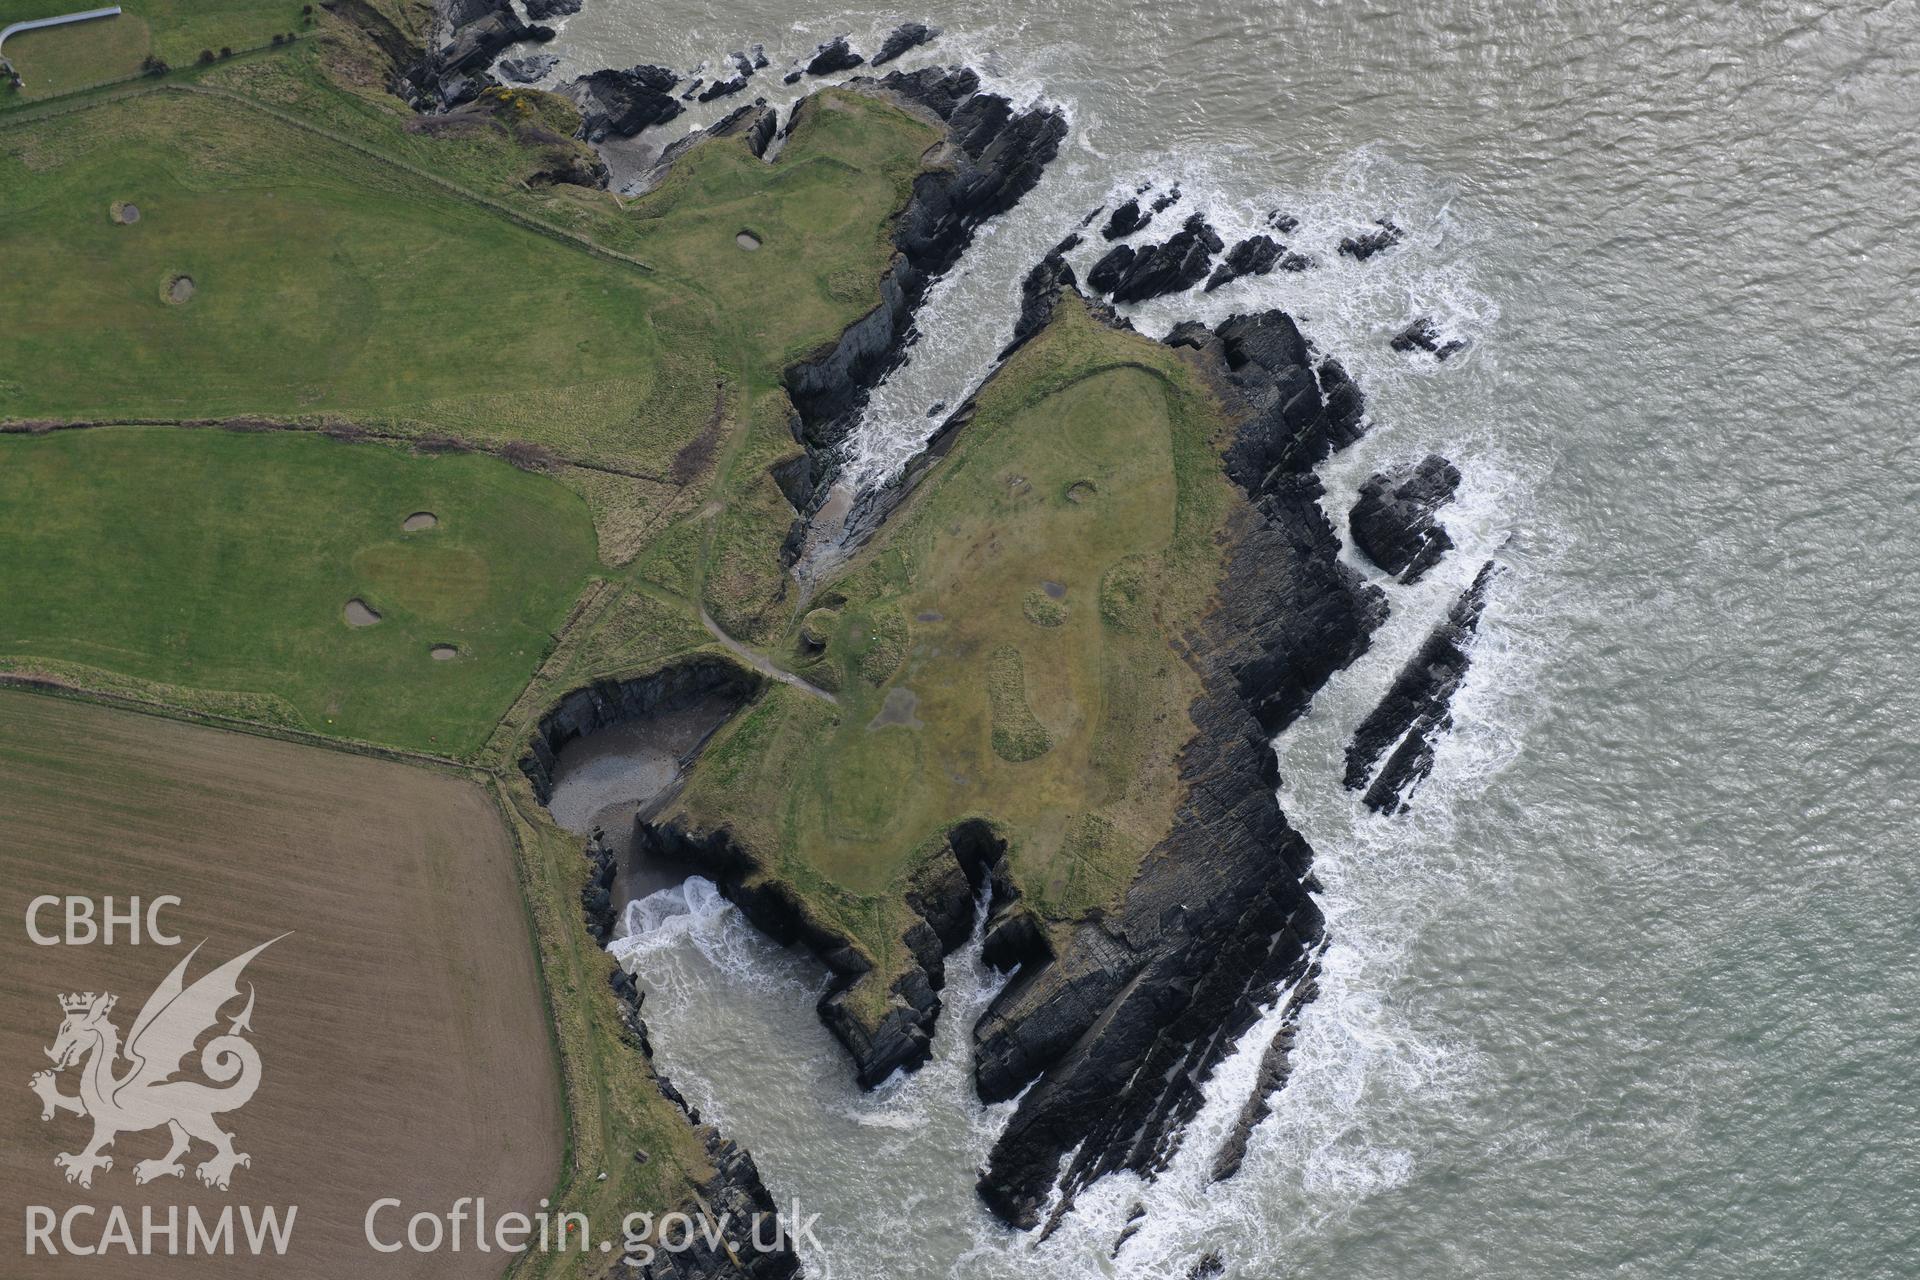 Craig-y-Gwbert and the site of former Craig-y-Gwbert lime kiln, Gwbert, near Cardigan. Oblique aerial photograph taken during the Royal Commission's programme of archaeological aerial reconnaissance by Toby Driver on 13th March 2015.